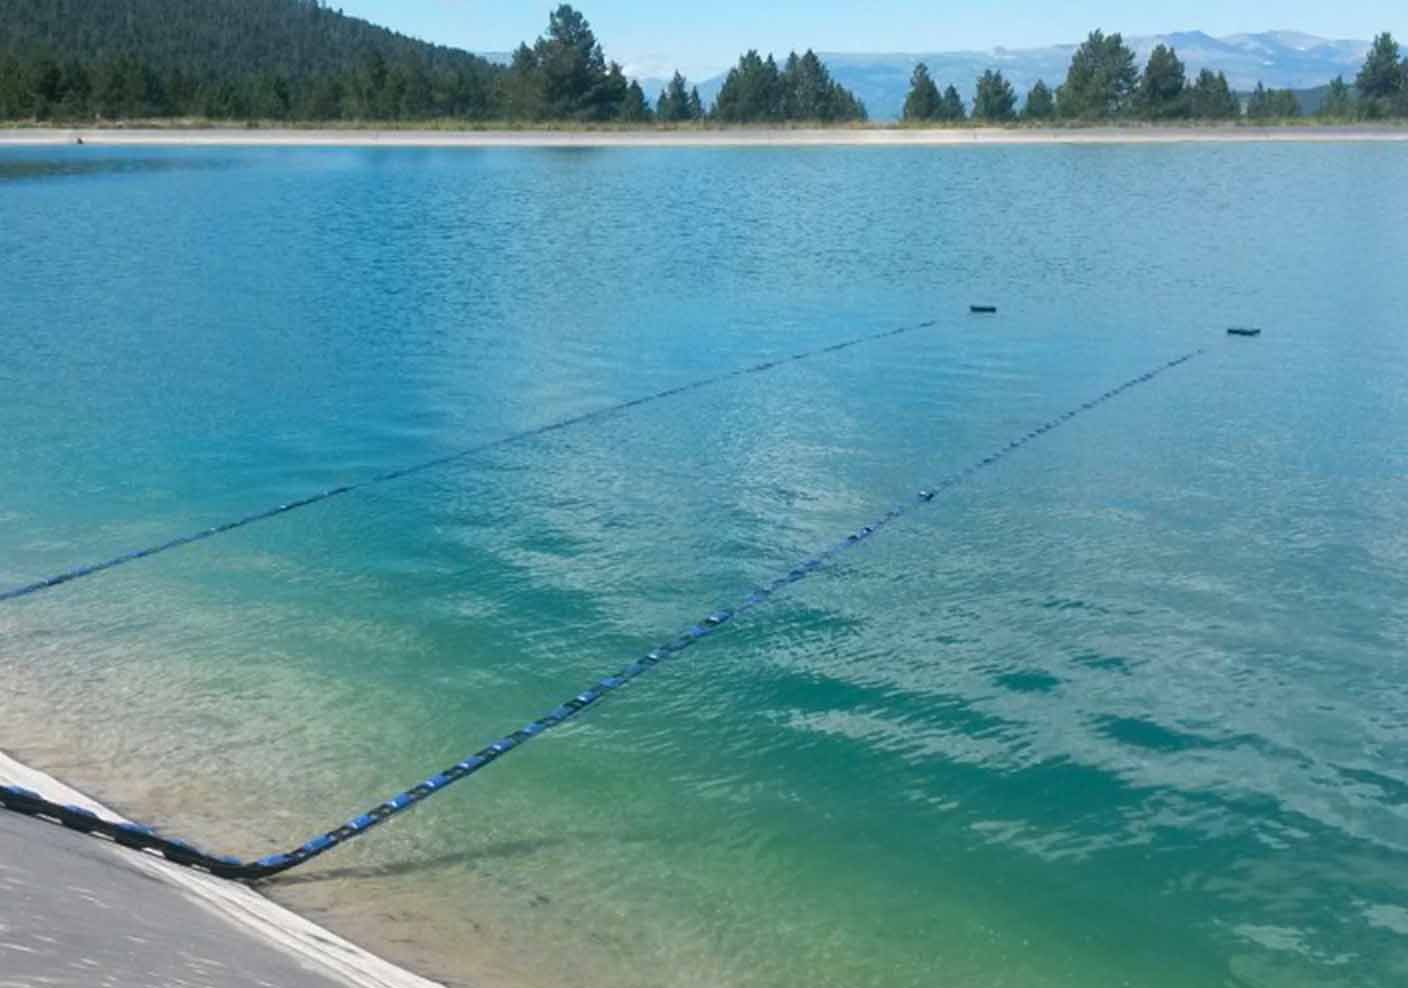 algae control with e-line extended by a flexi-arm